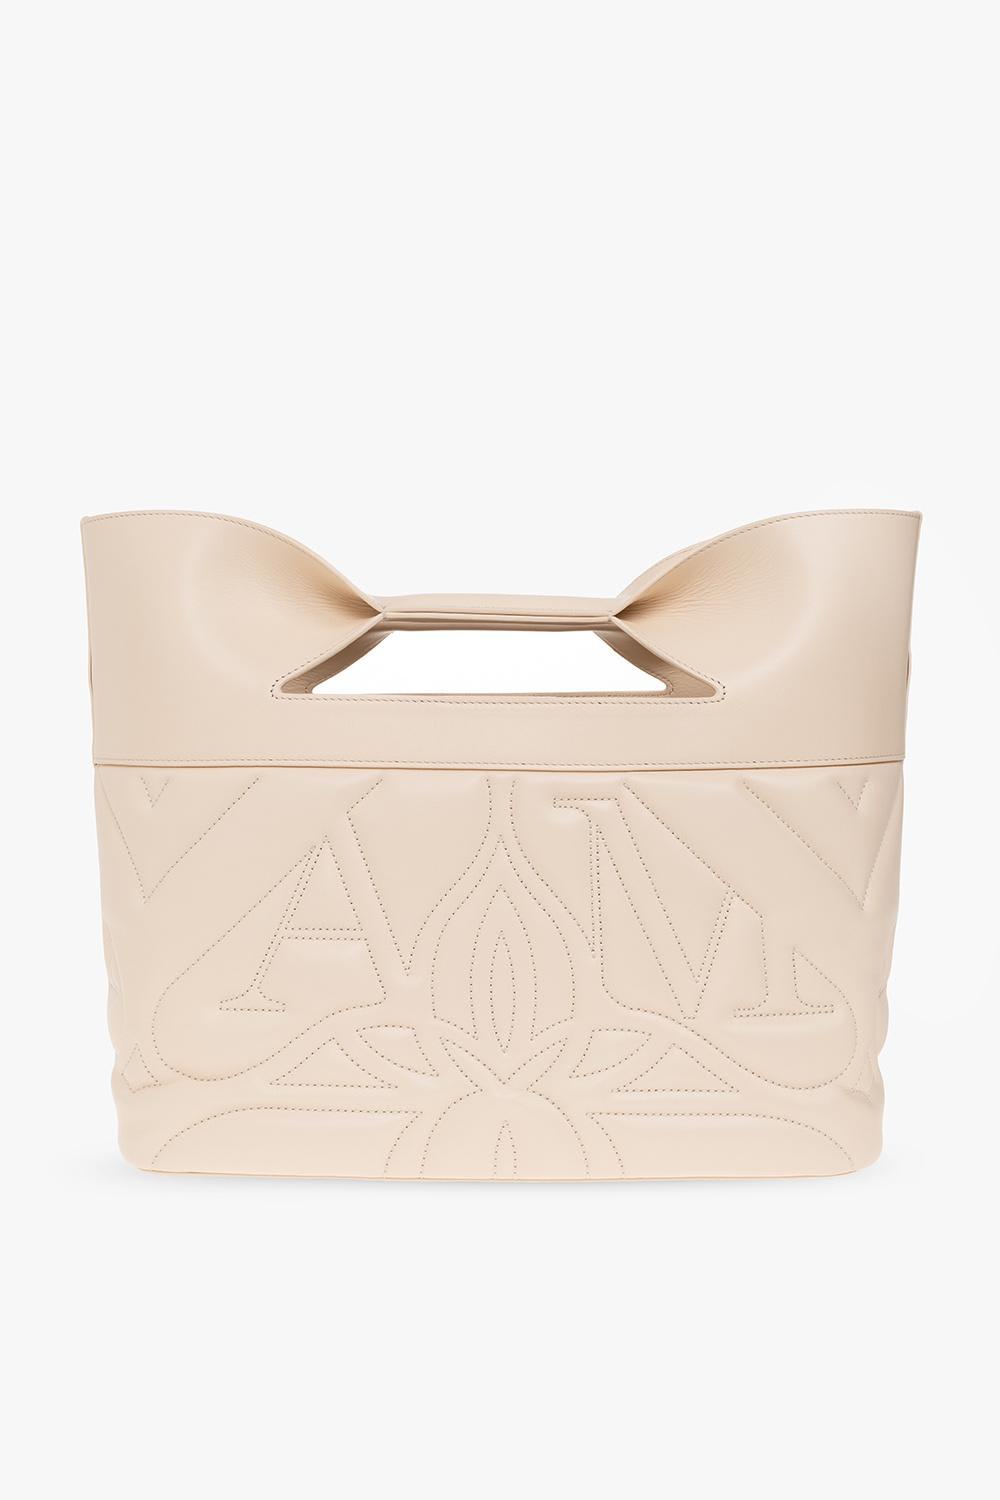 Alexander McQueen The Bow Small Shopper Bag in Natural | Lyst